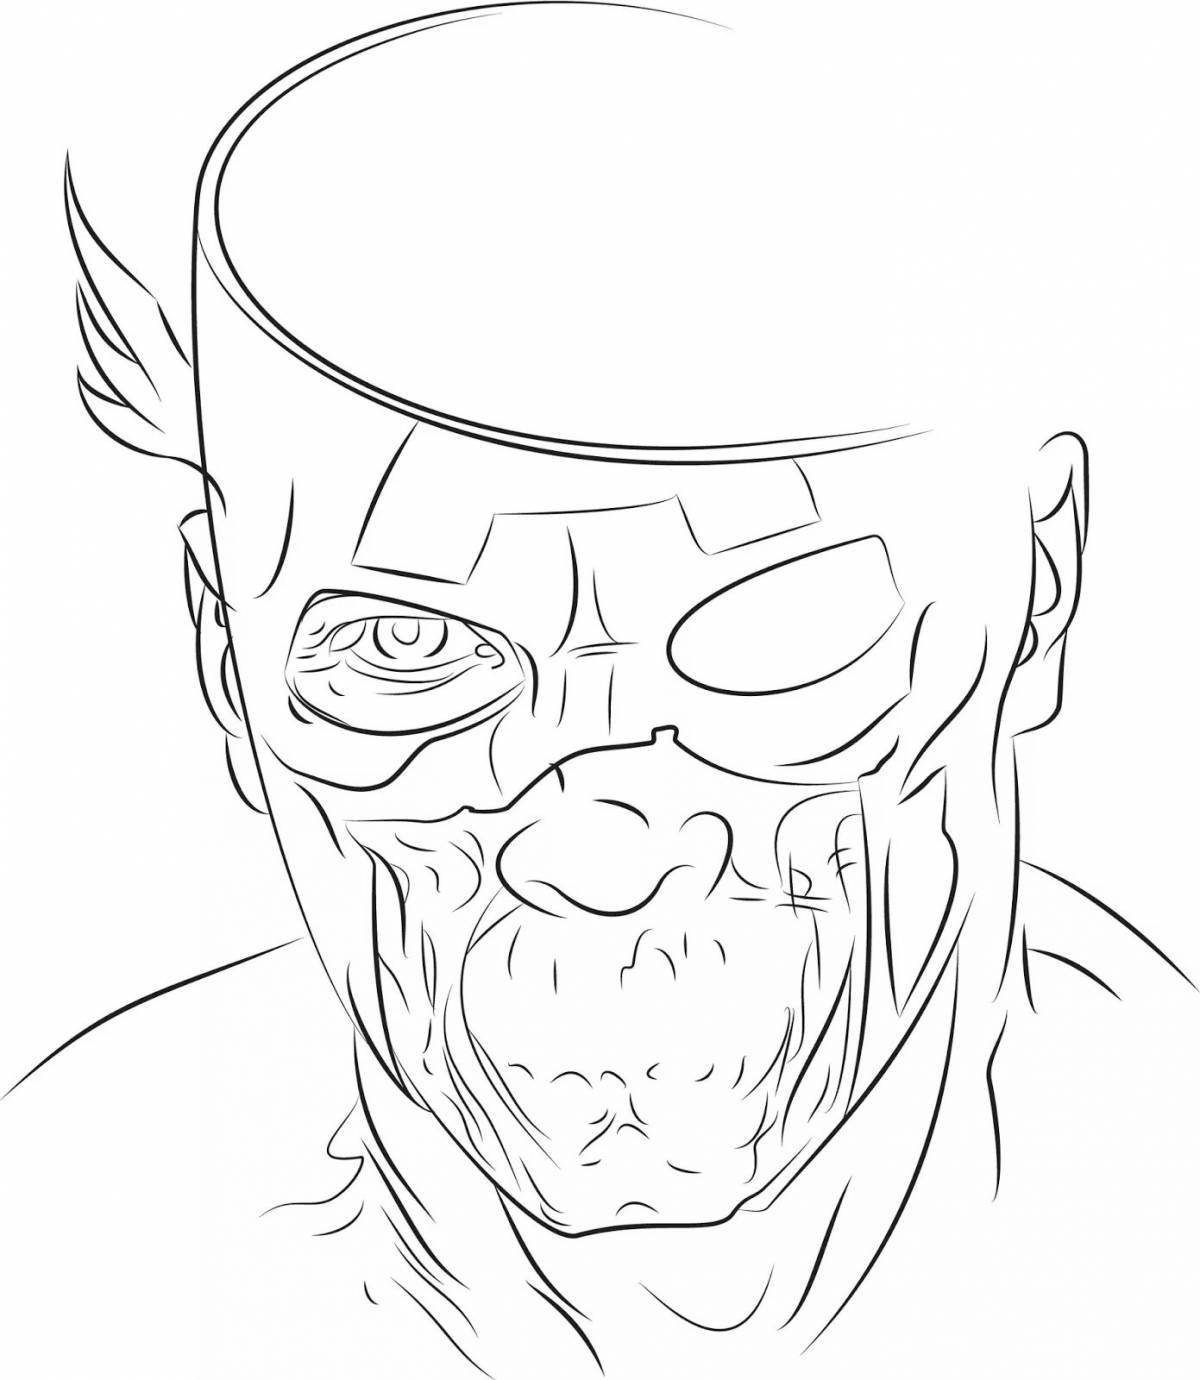 Captain America zombie coloring page